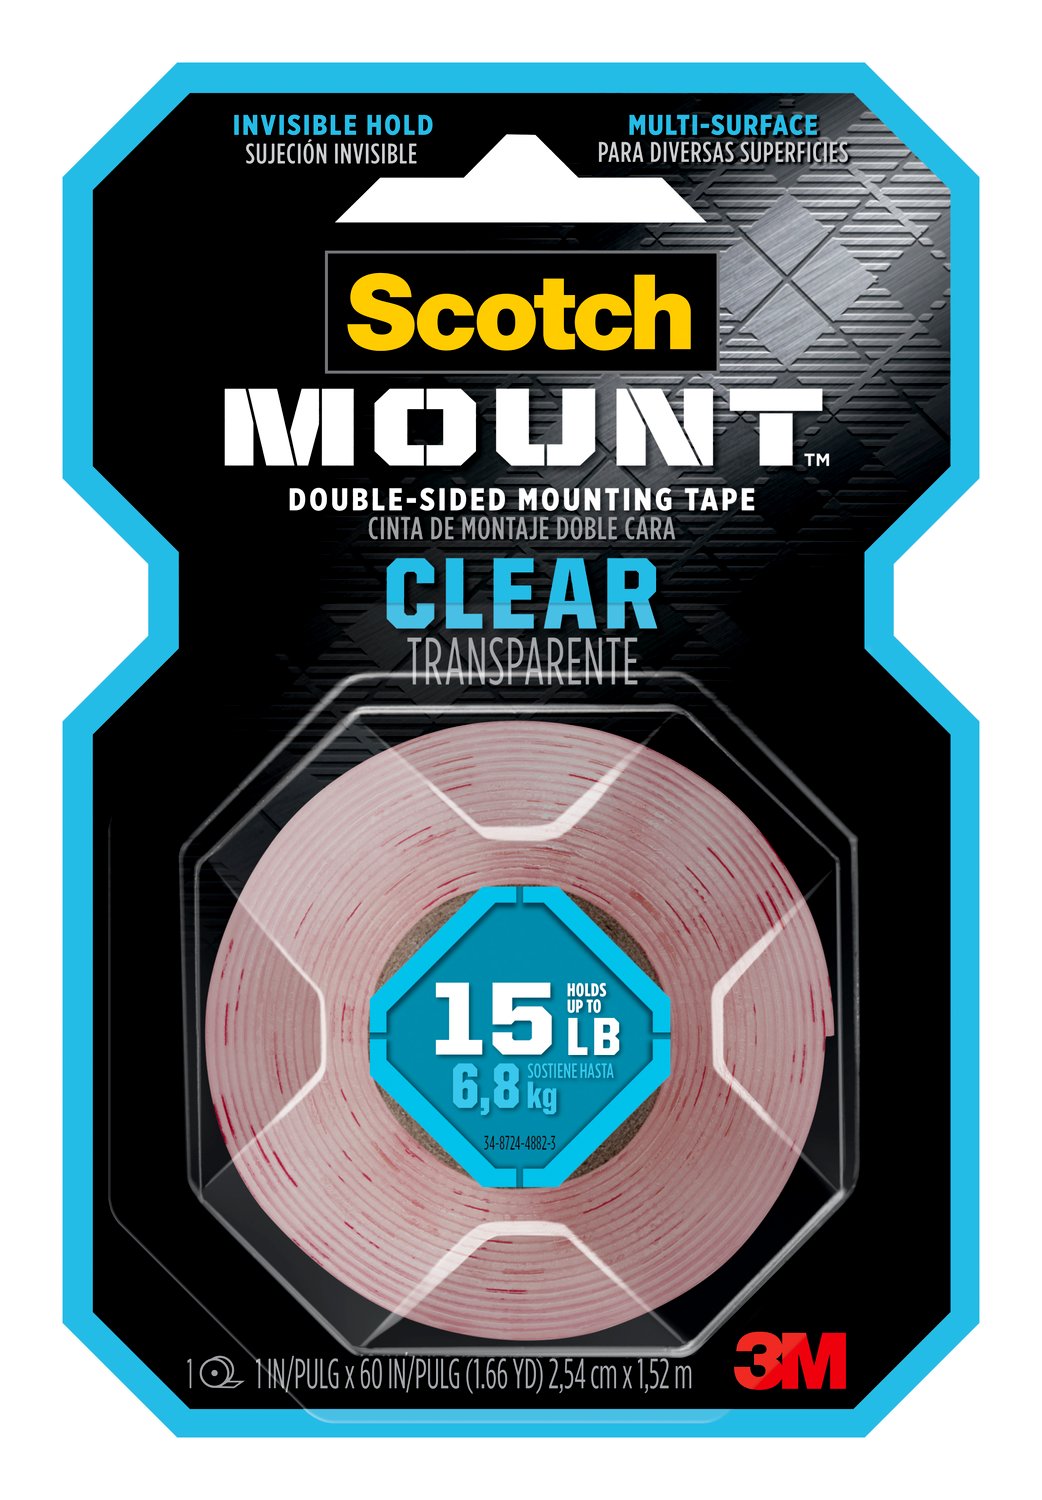 7100205653 - Scotch-Mount Clear Double-Sided Mounting Tape 410H, 1 in x 60 in (2.54
cm x 1.52 m)